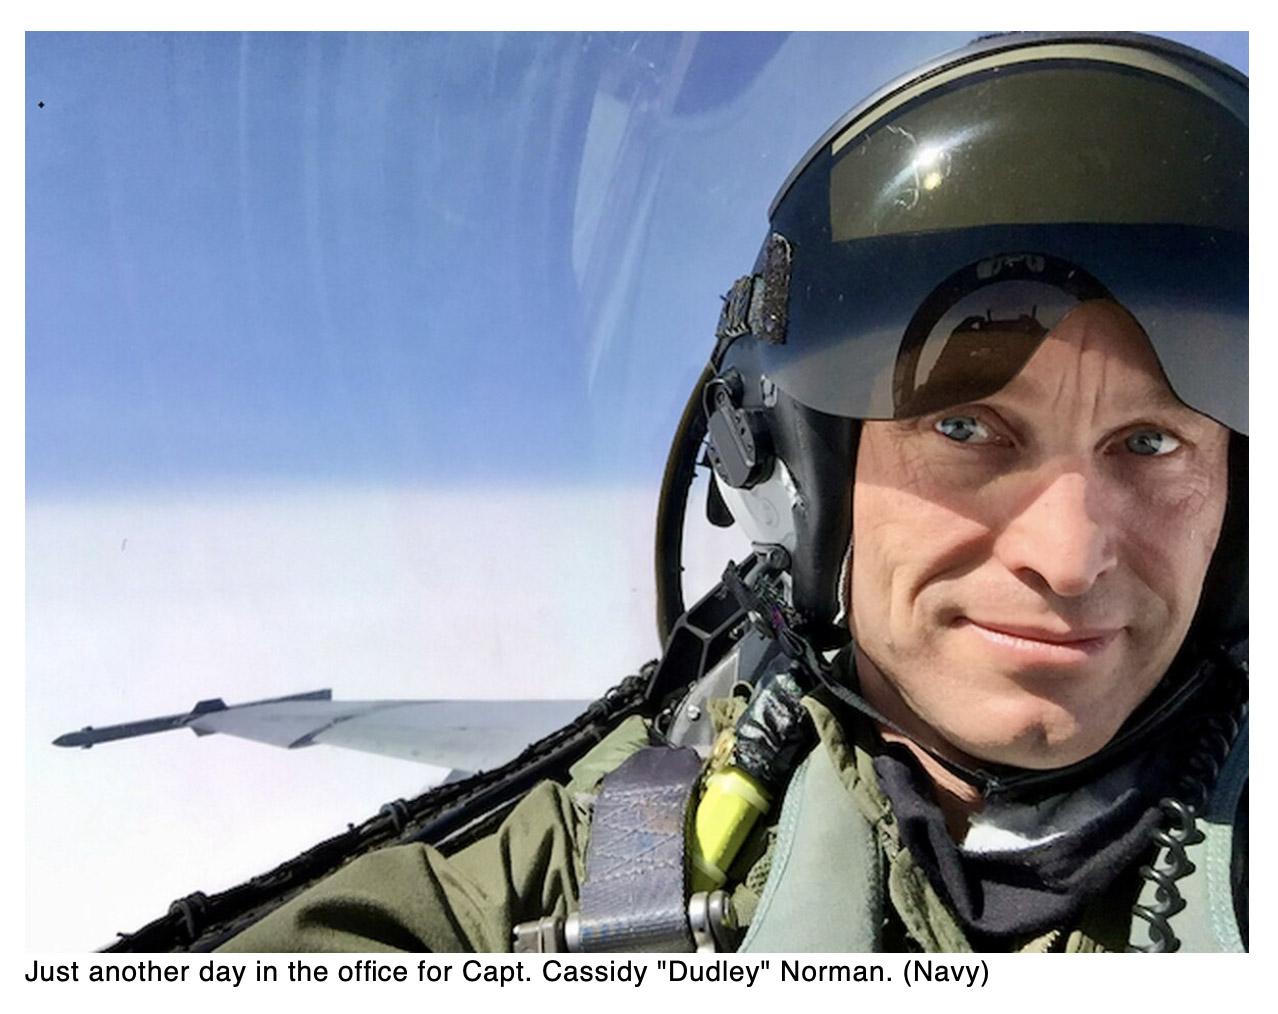  Meet the Navy pilot who landed on six classes of US aircraft carriers